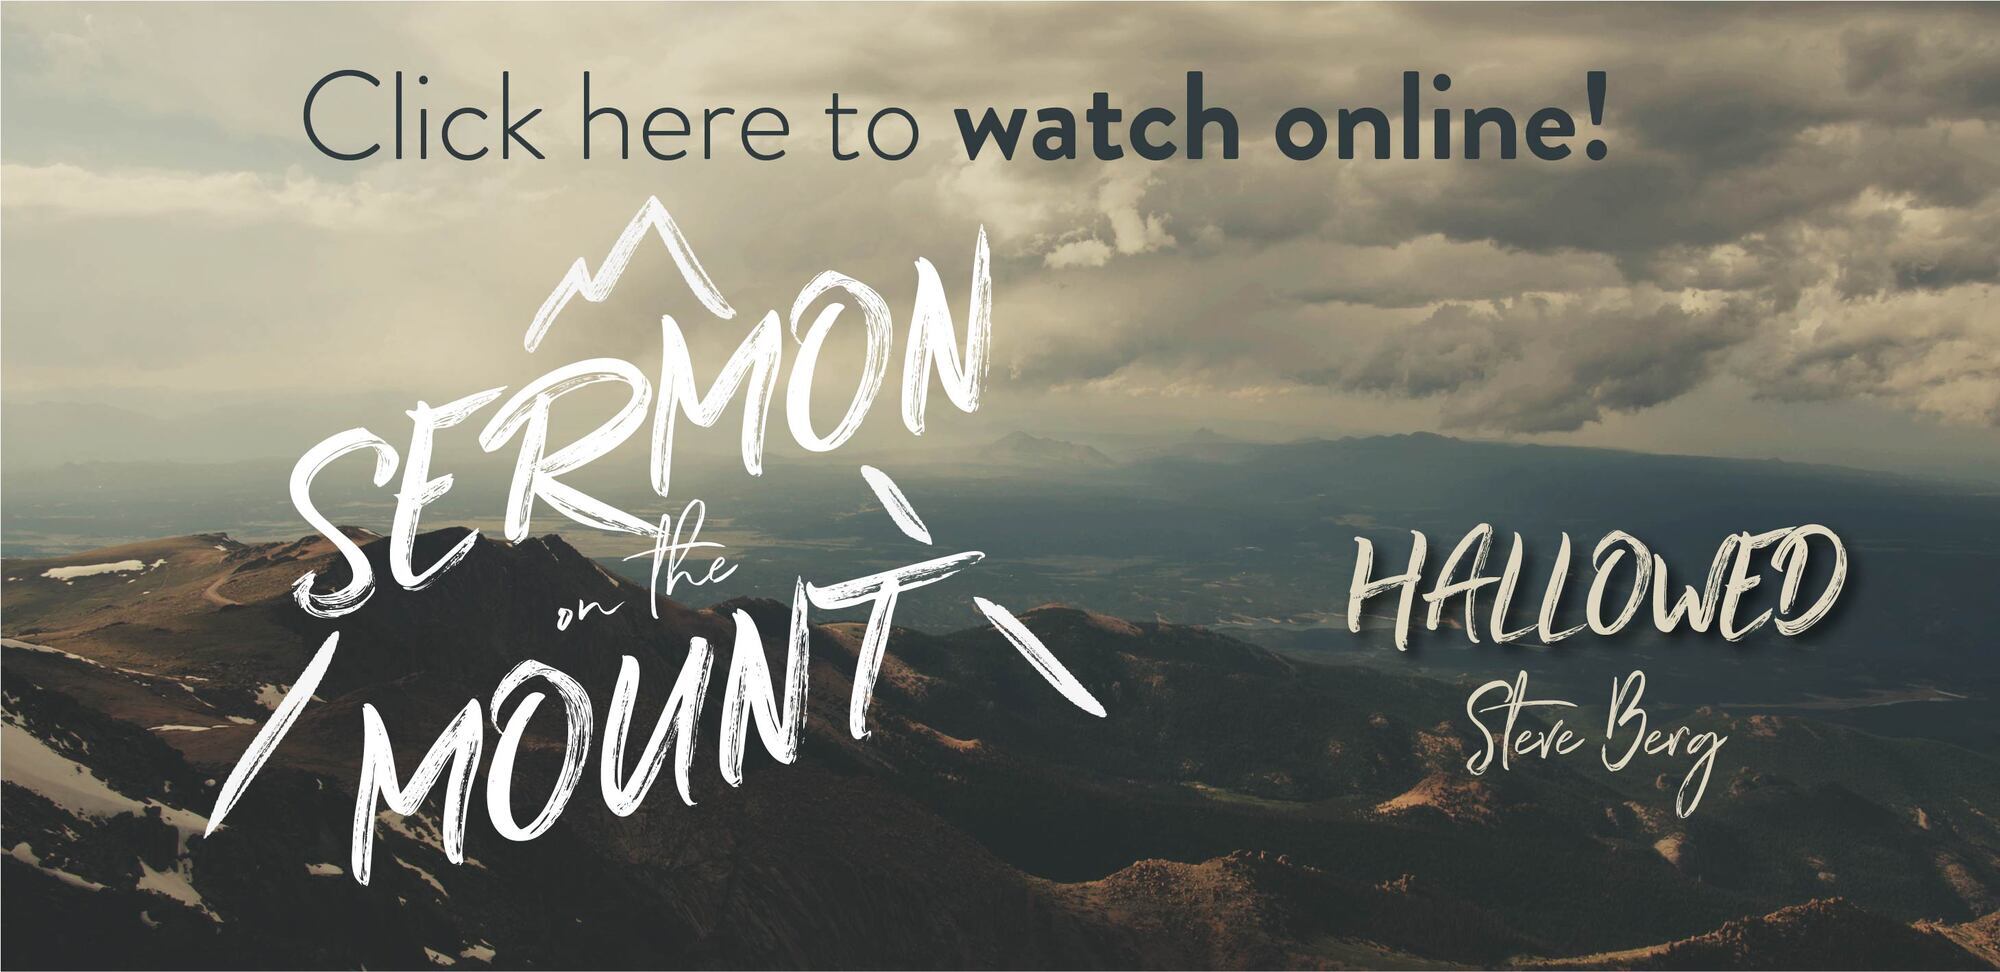 Preview of SERMON ON THE MOUNT: Hallowed